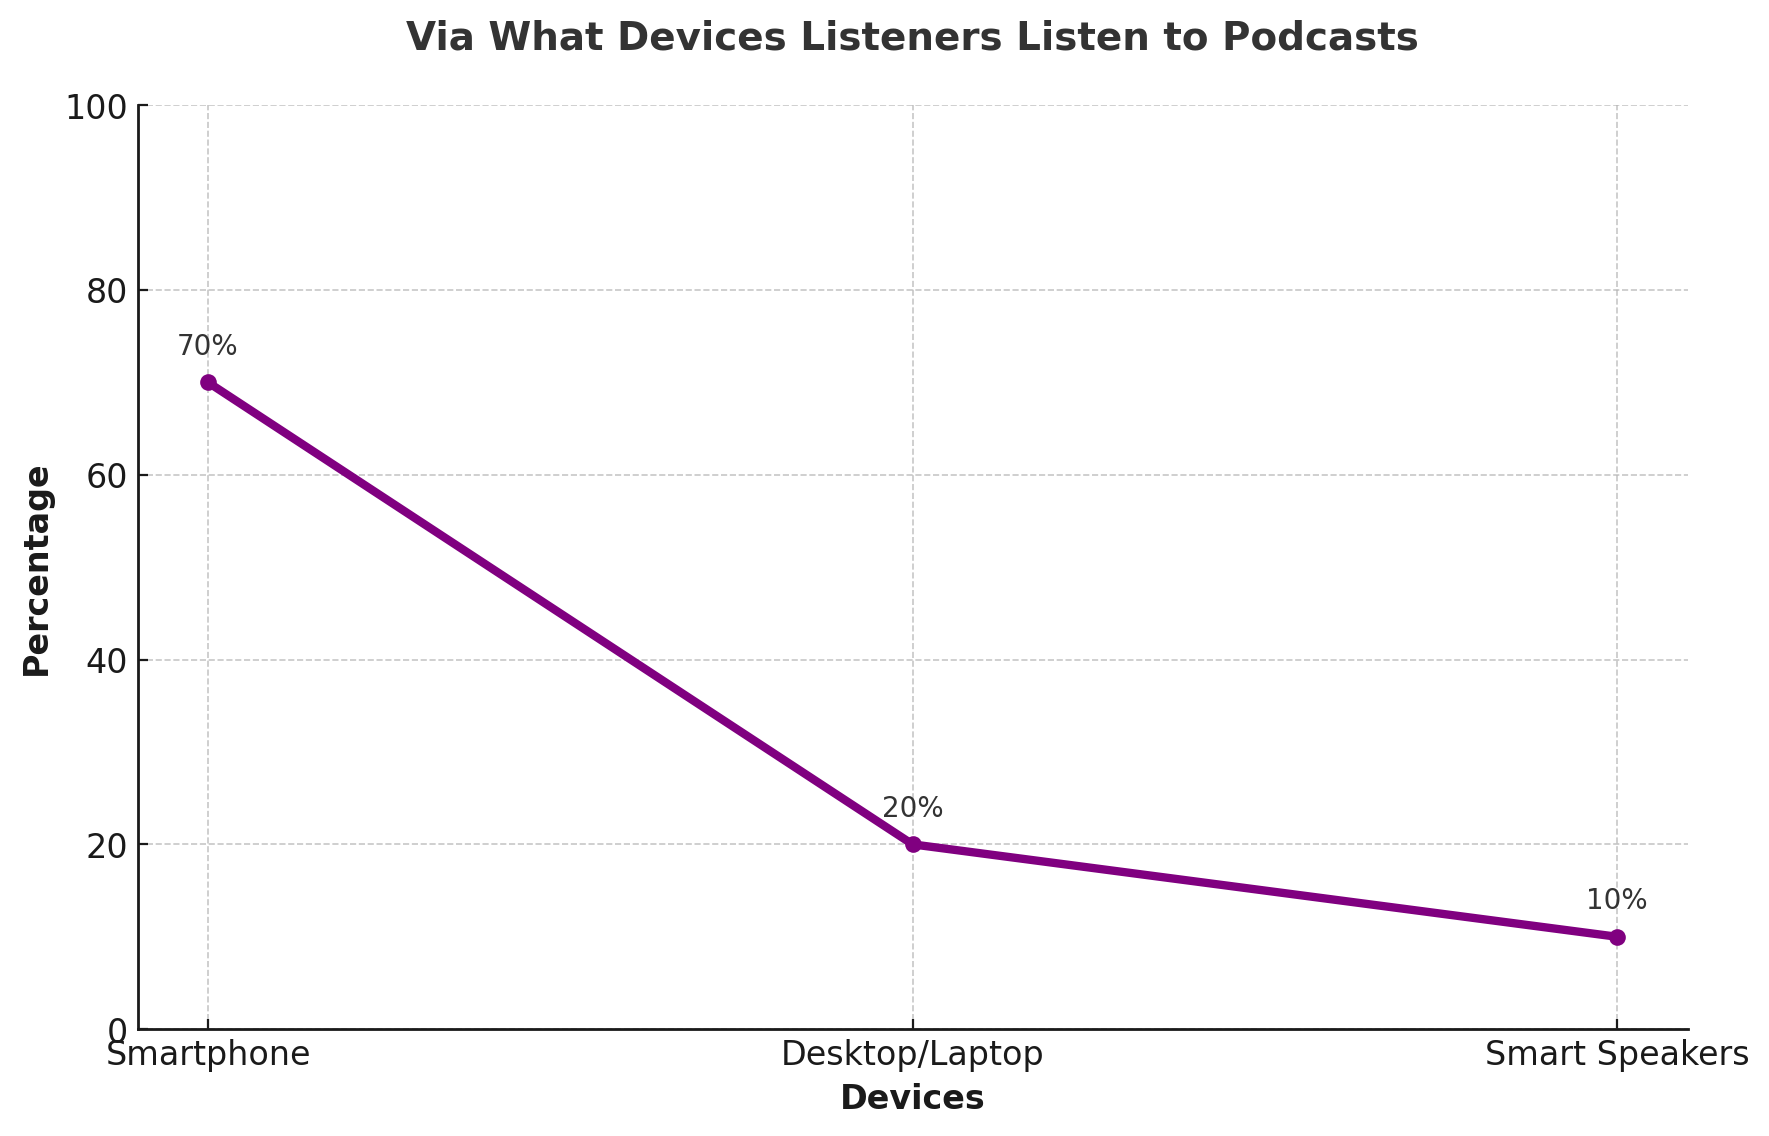 Via what devices listeners listen to podcasts